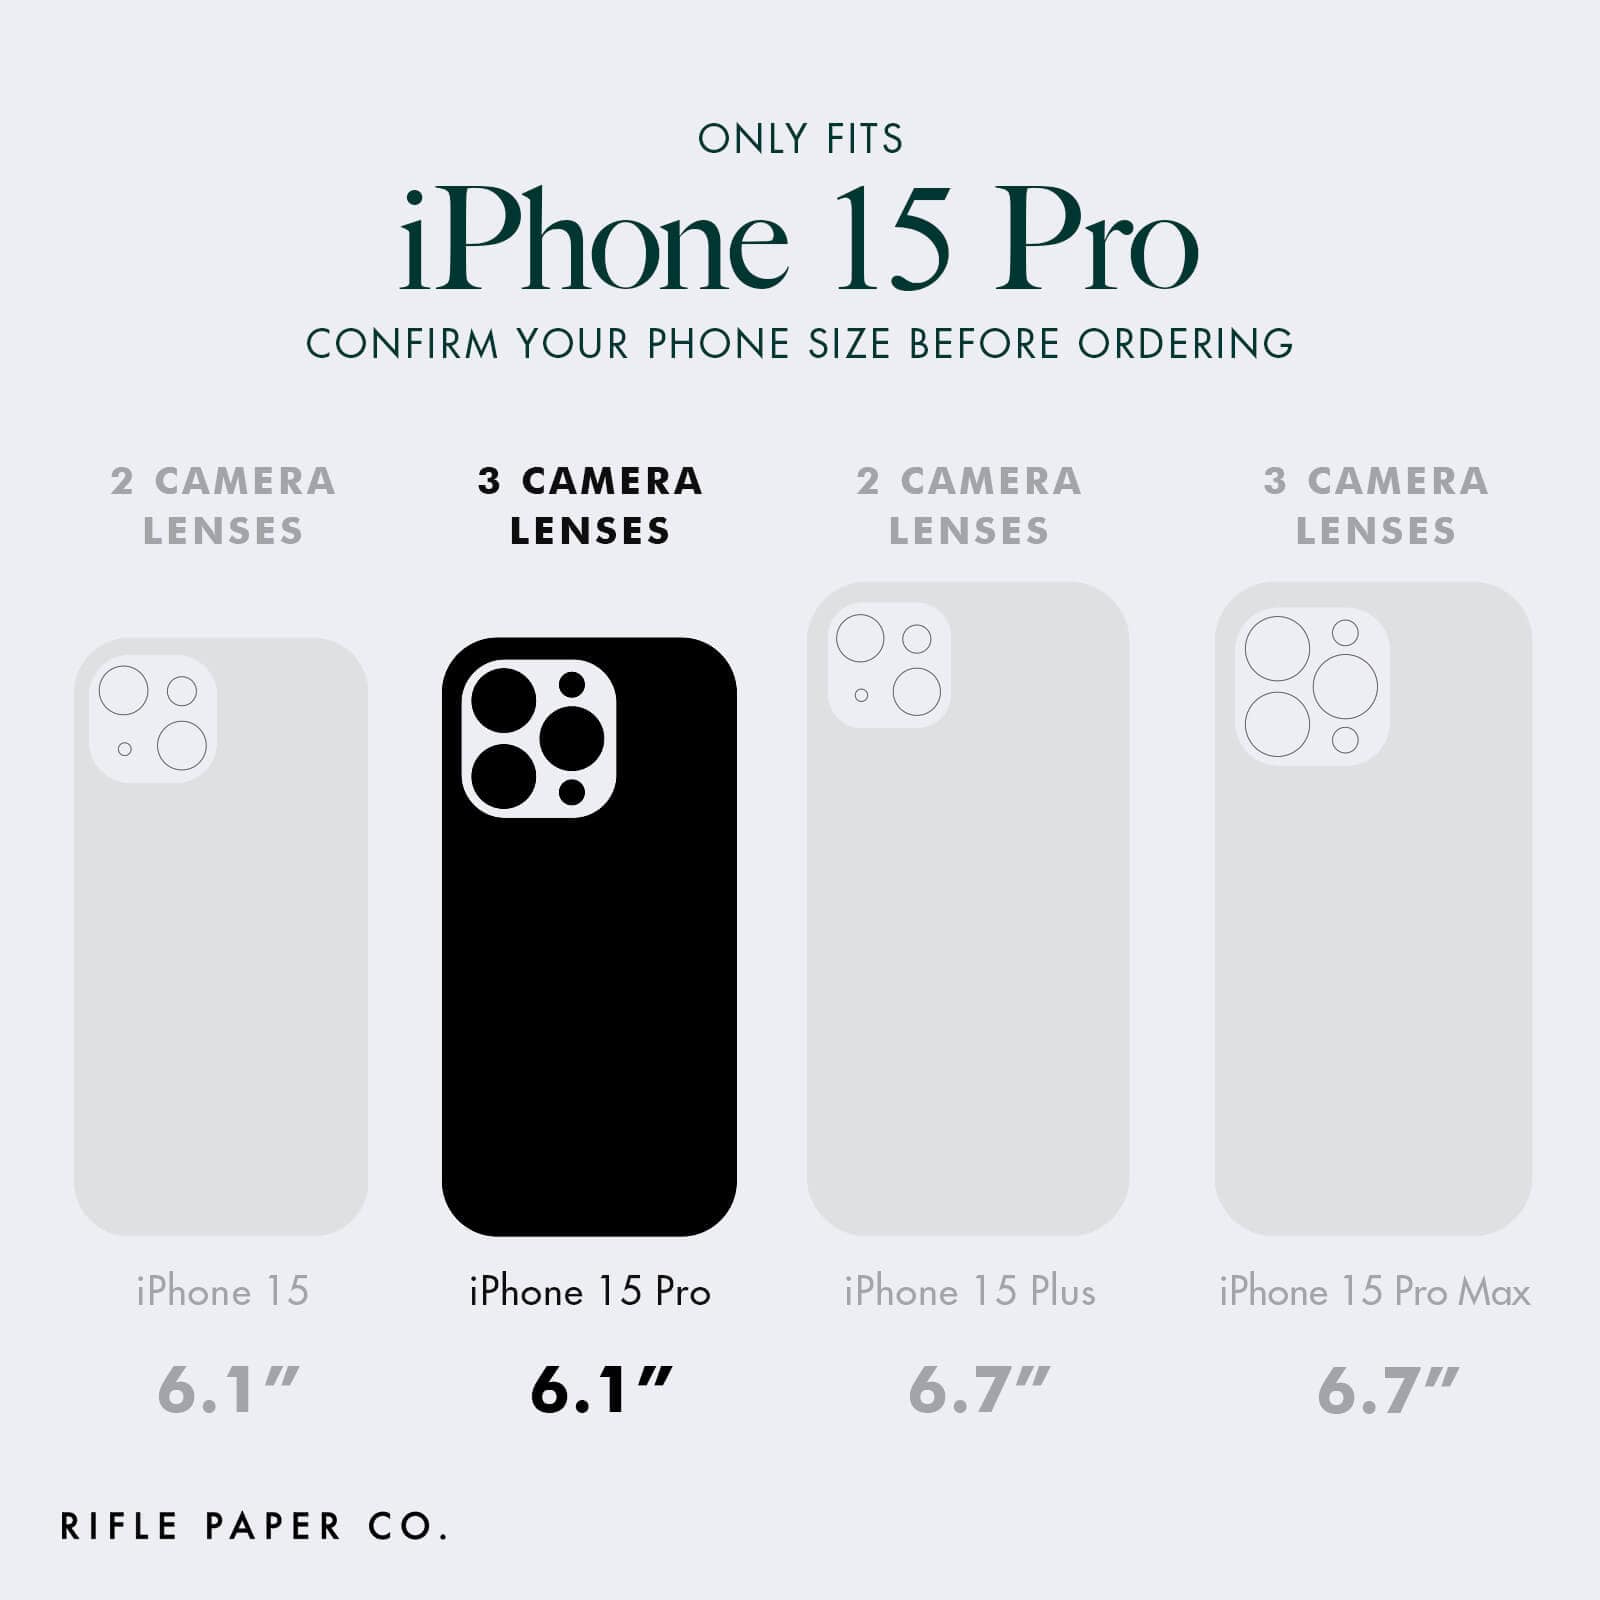 ONLY FITS IPHONE 15 PRO. CONFIRM YOUR PHONE SIZE BEFORE ORDERING.